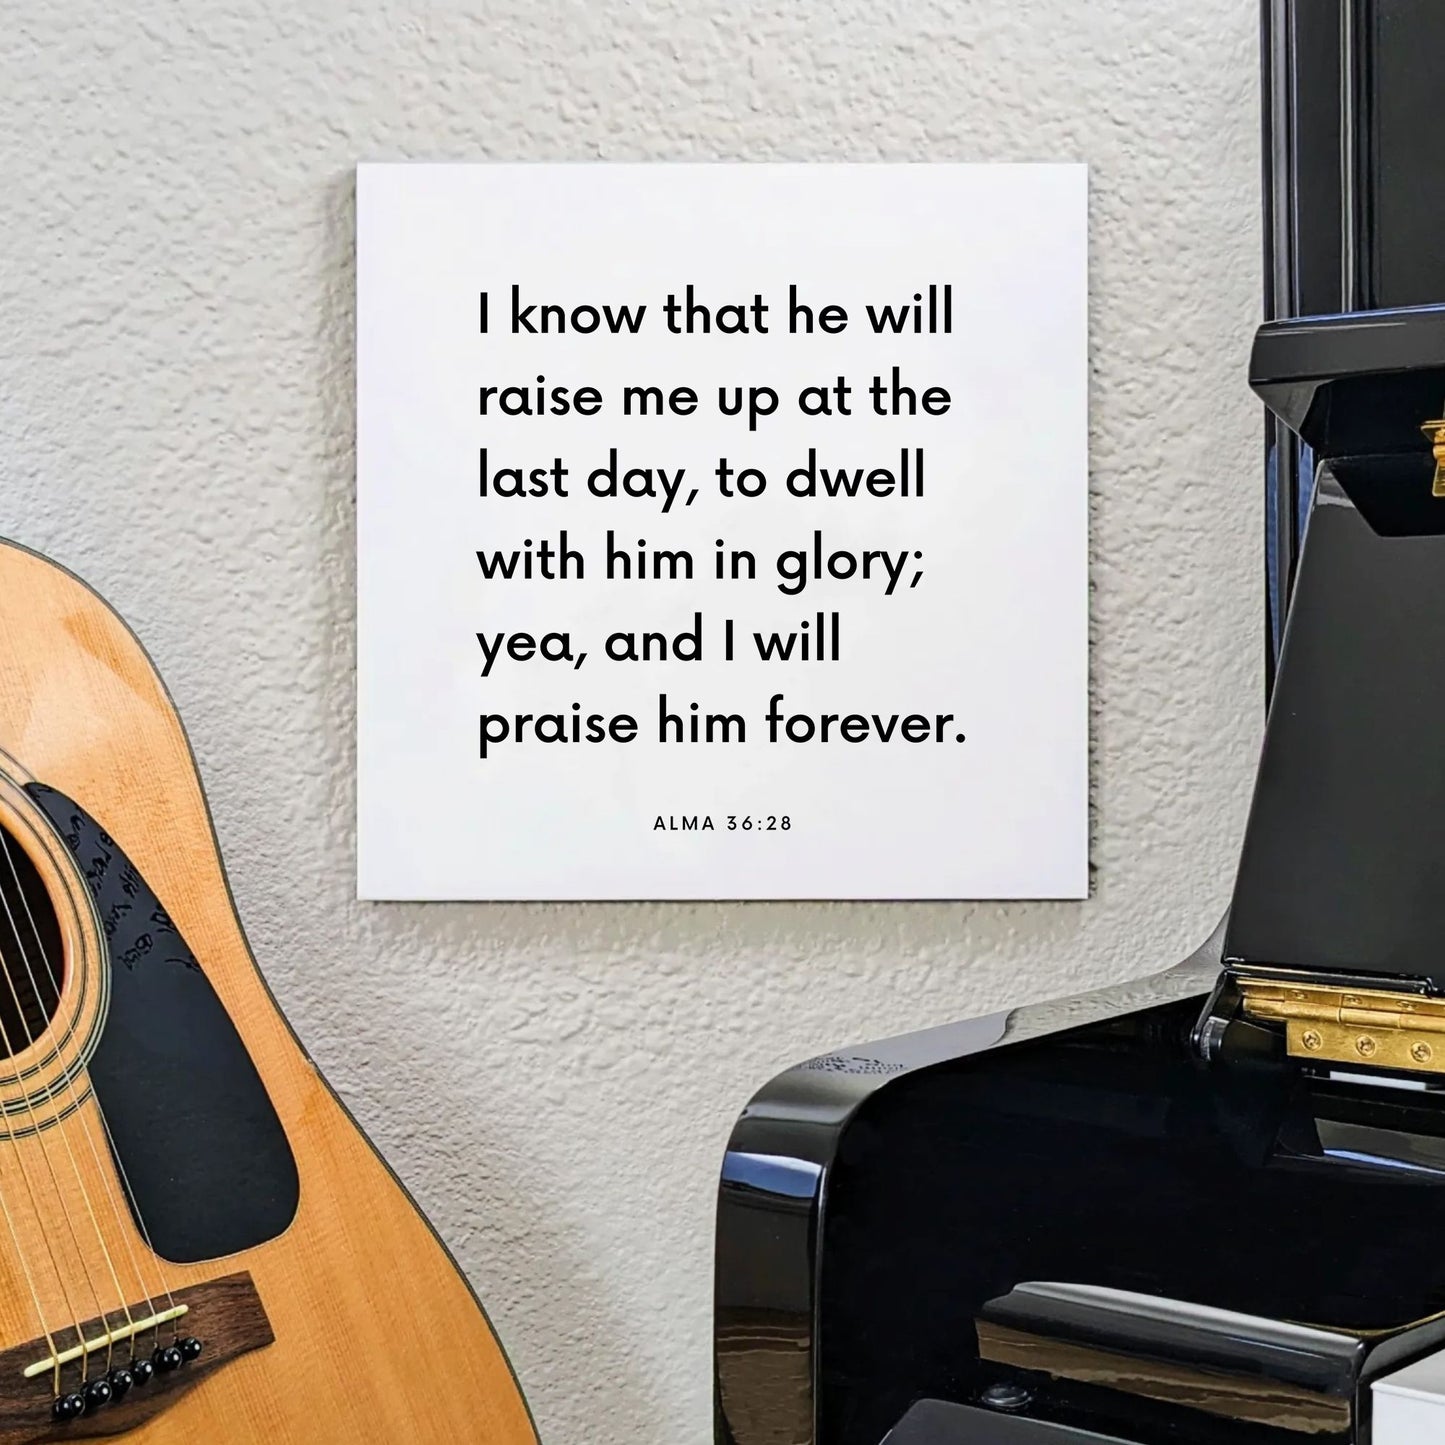 Music mouting of the scripture tile for Alma 36:28 - "I know that he will raise me up at the last day"